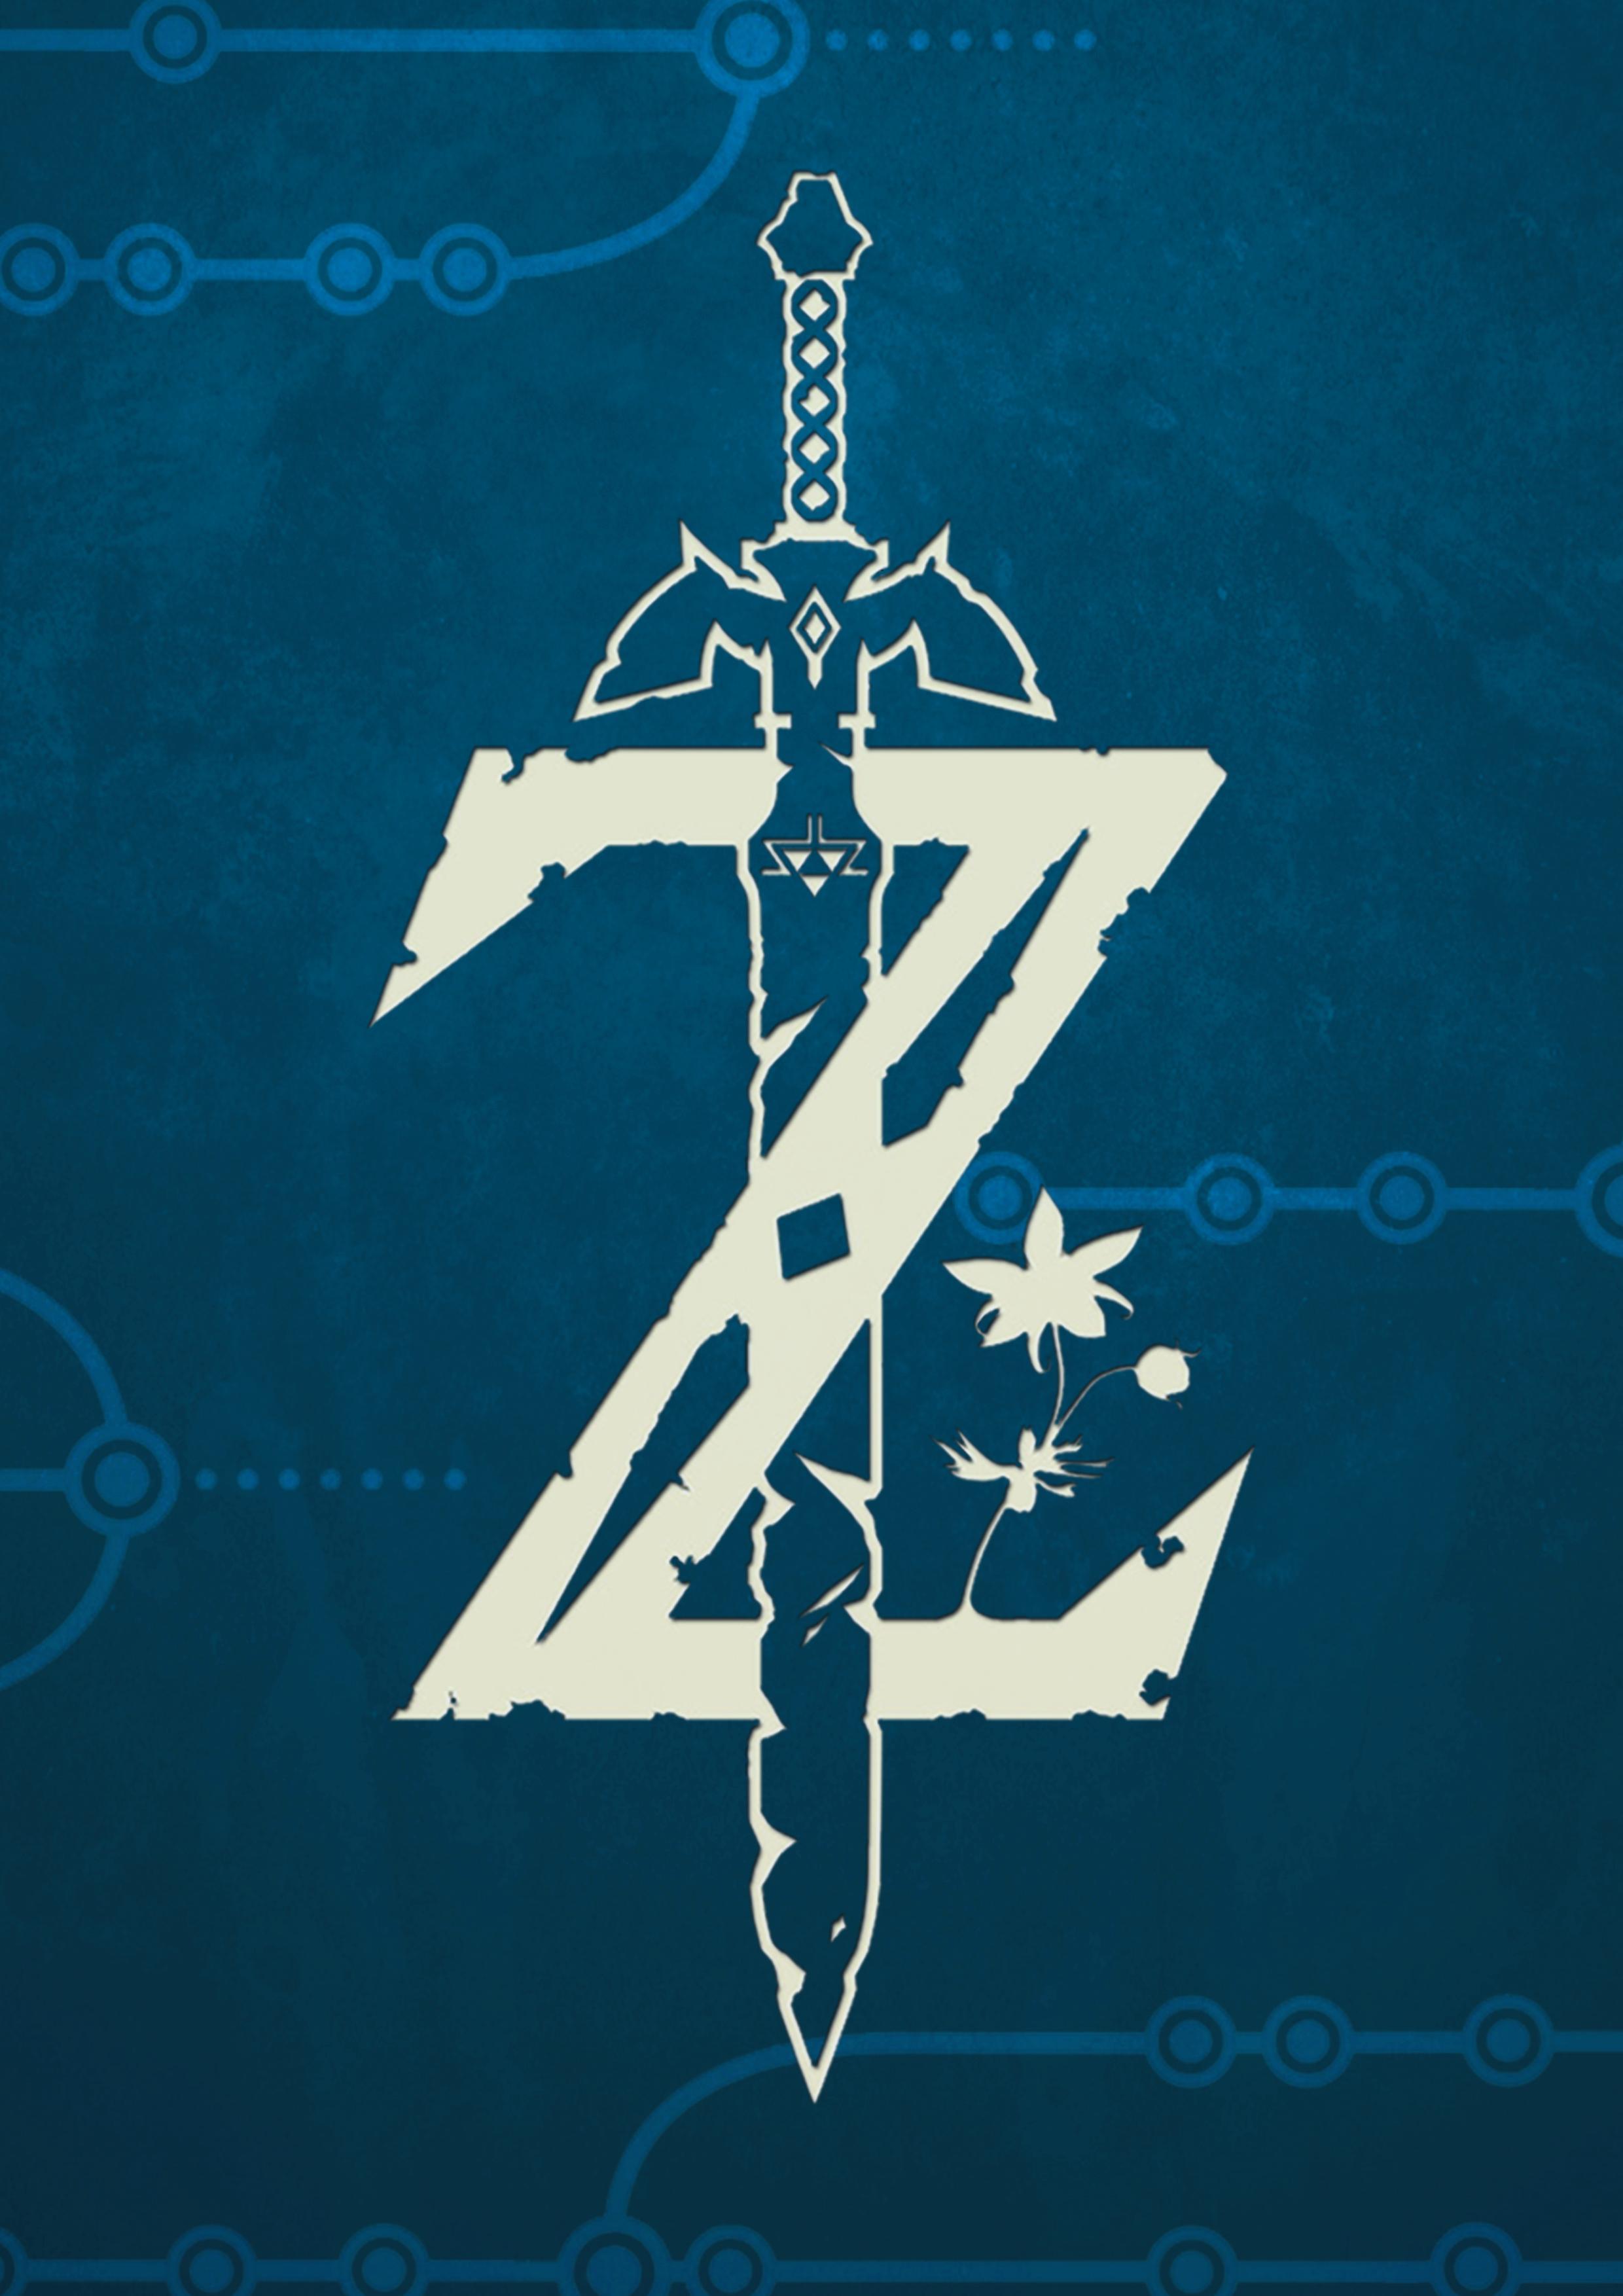 Made myself some simple BOTW Mobile wallpapers, here to share